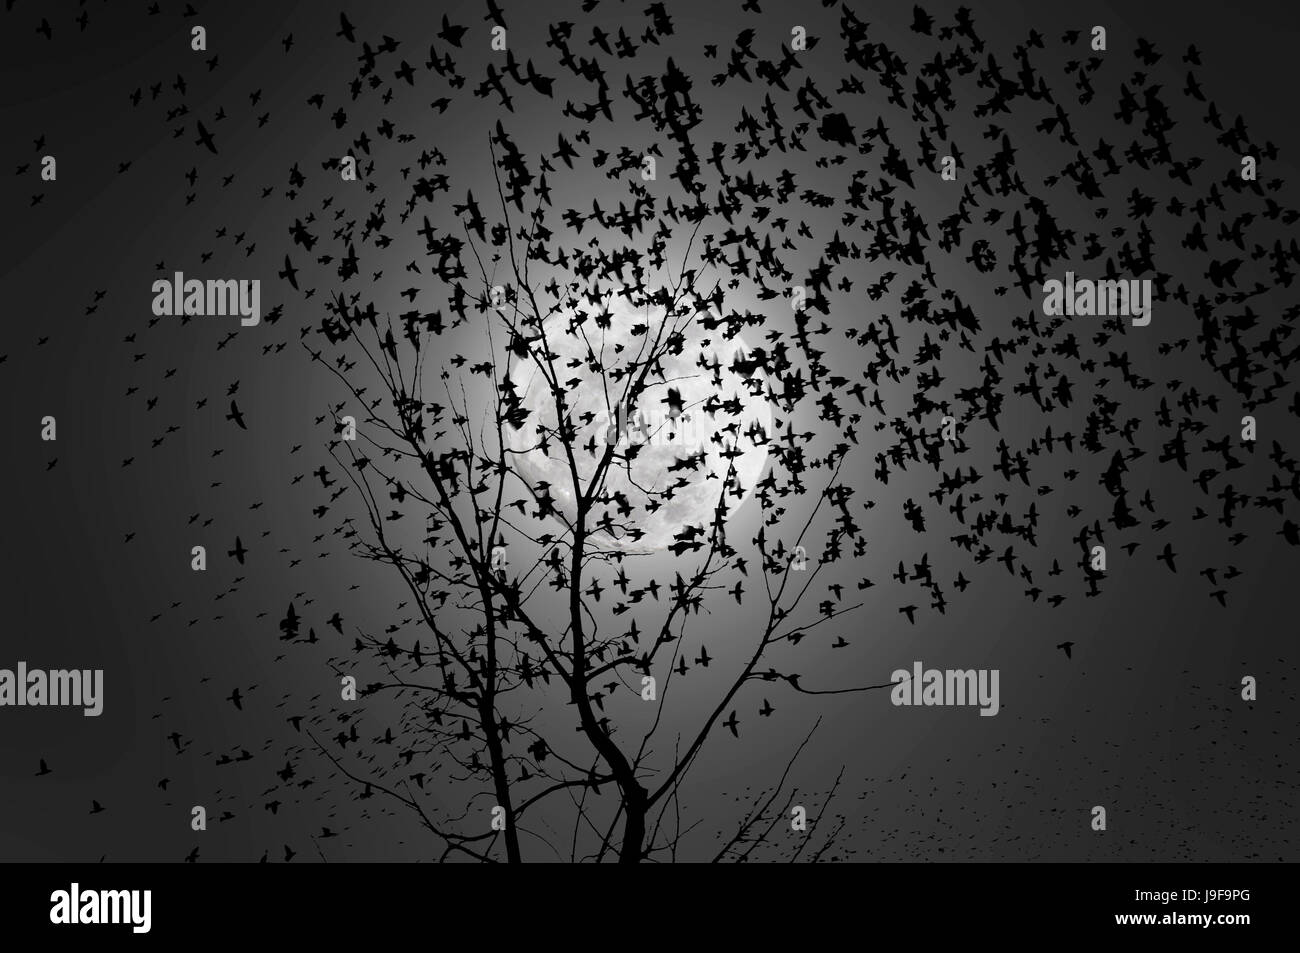 Background image of a flock of birds flying in the moonlight Stock Photo